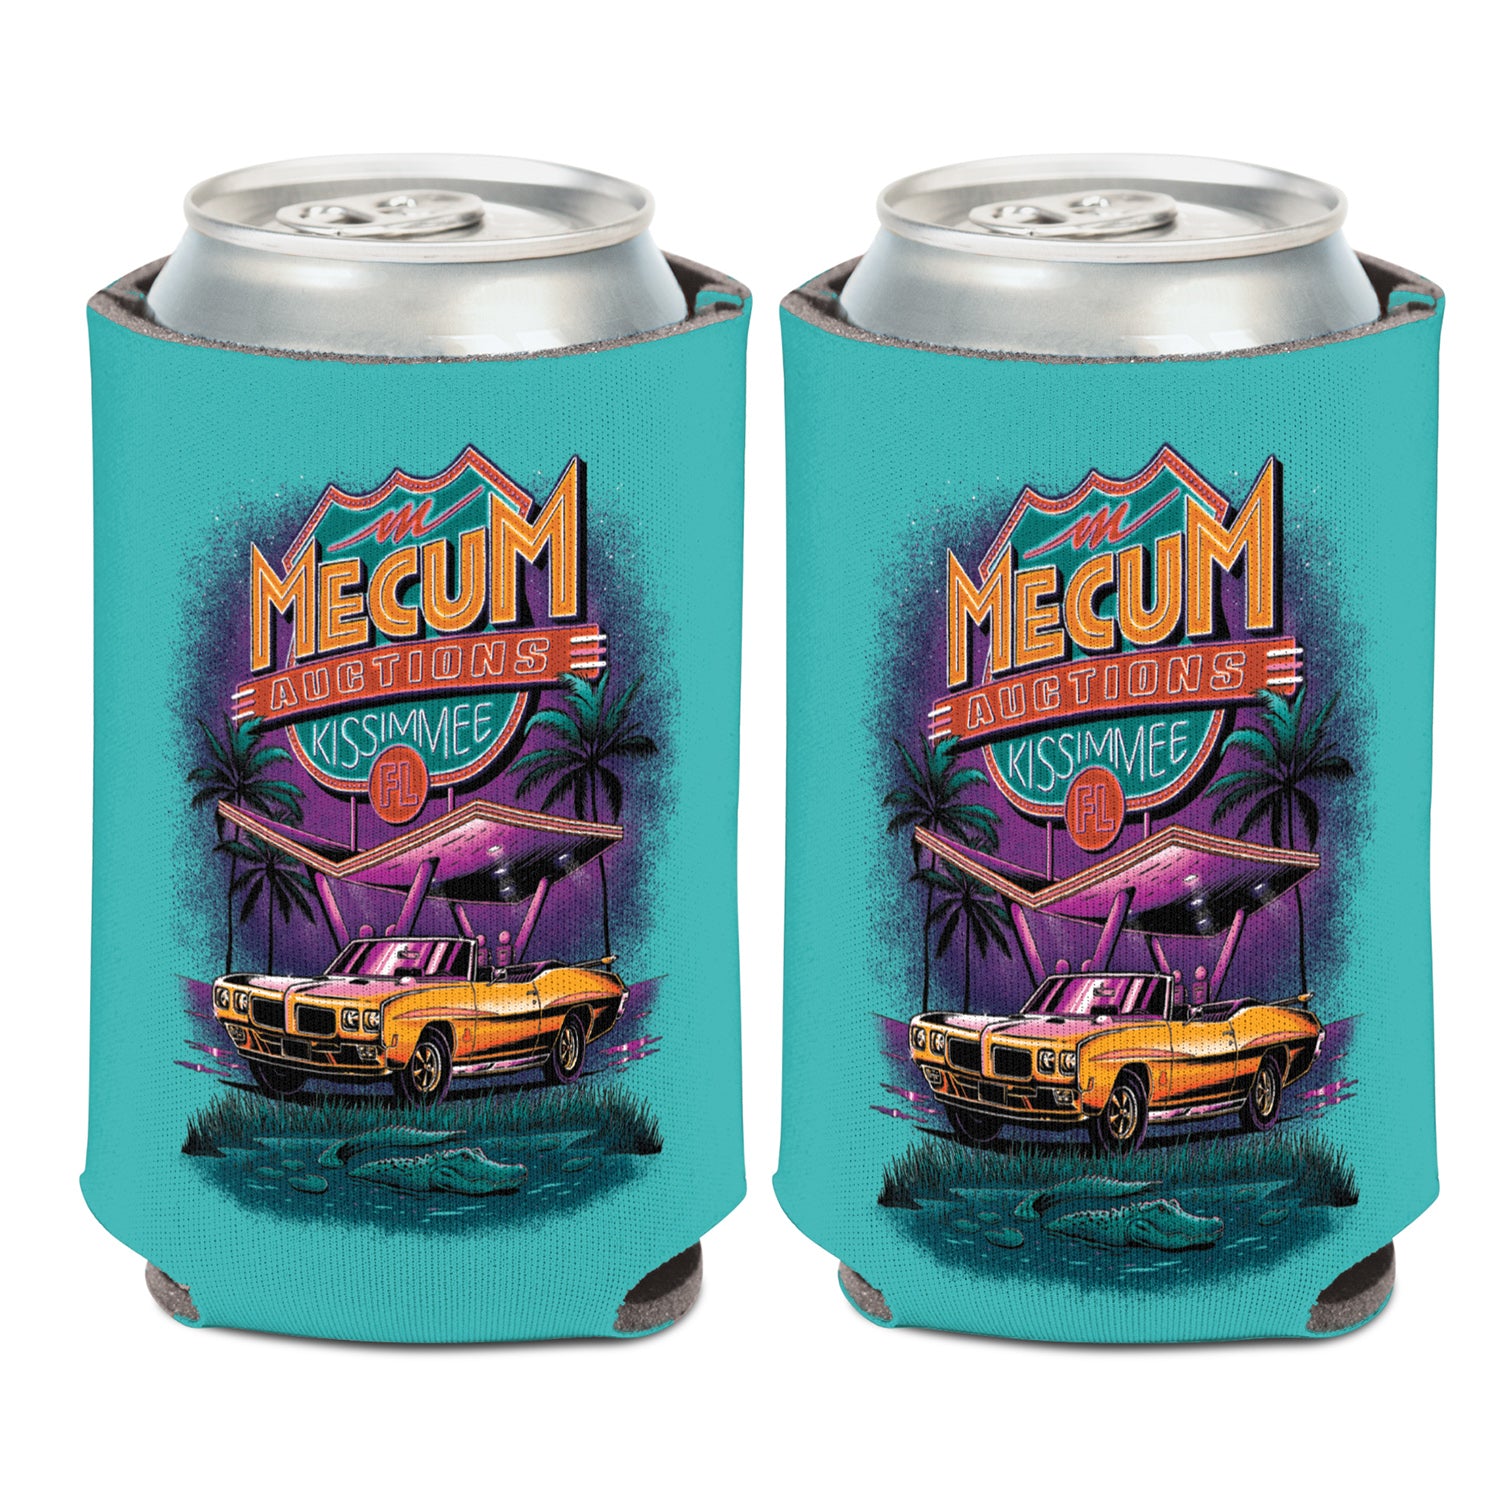 Mecum Auctions Kissimmee Teal Can Cooler - Front and Back View